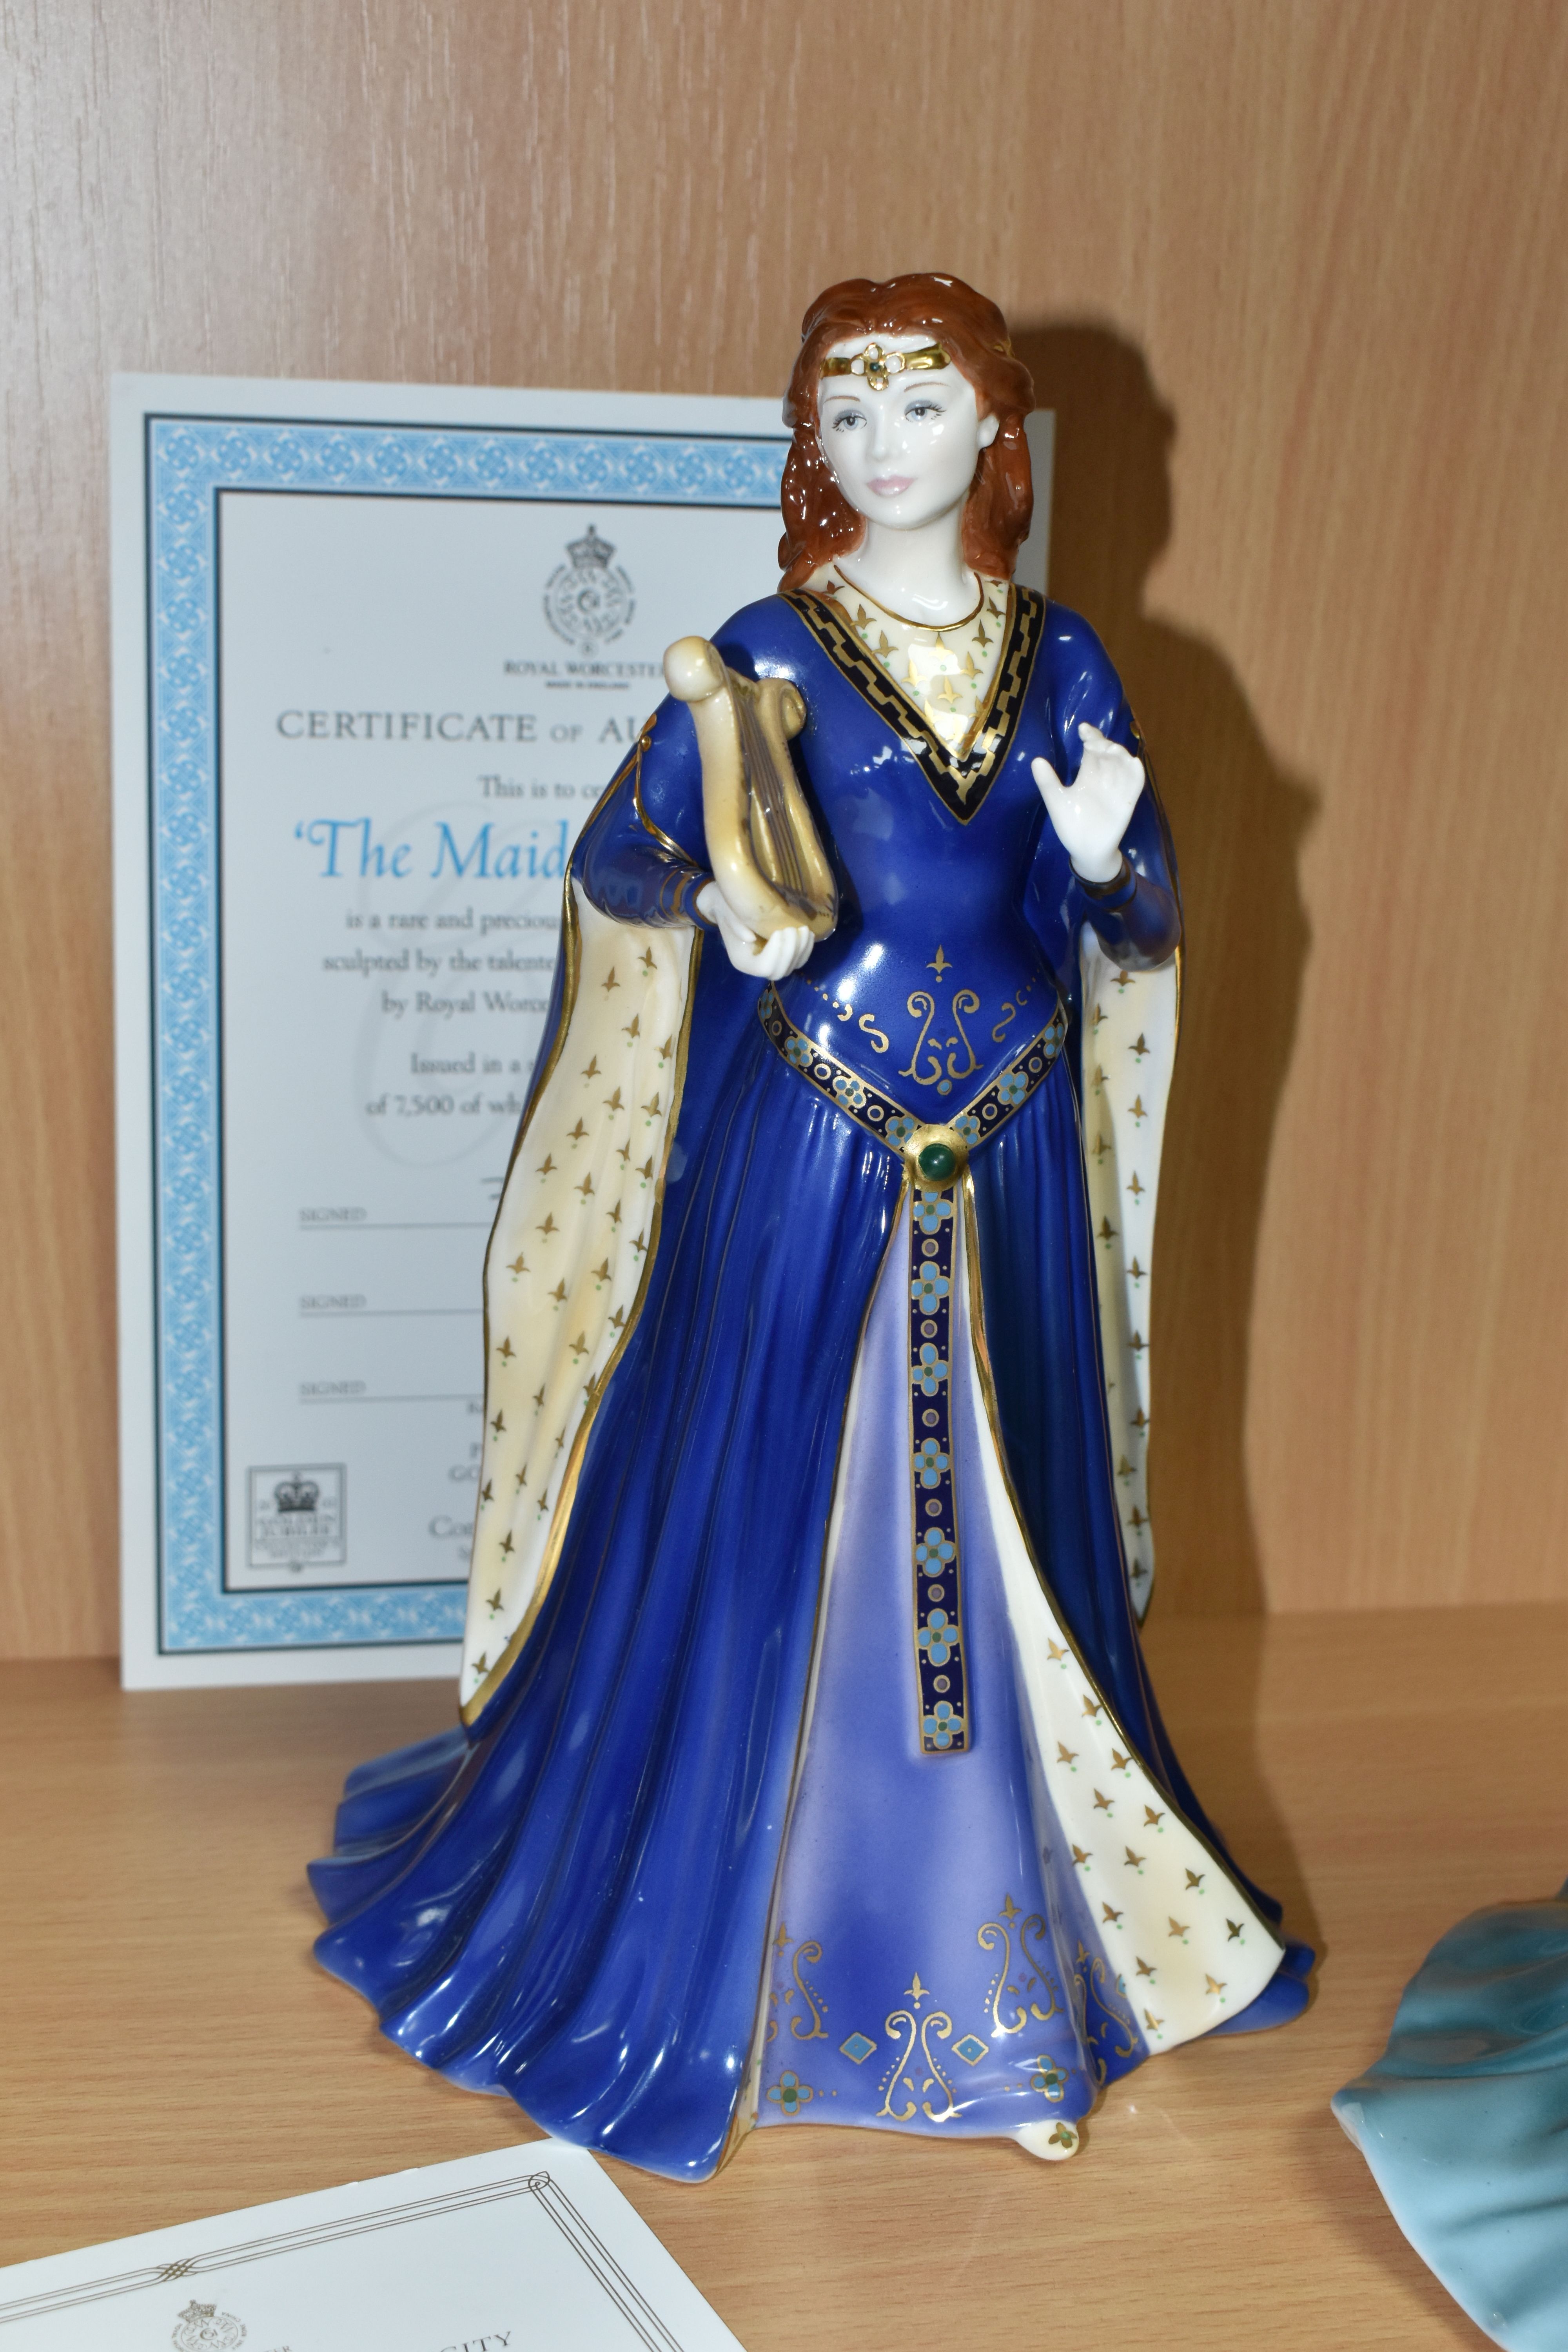 SEVEN ROYAL WORCESTER PETER HOLLAND 'CELTIC' FIGURINES, limited edition for Compton & Woodhouse, - Image 7 of 9